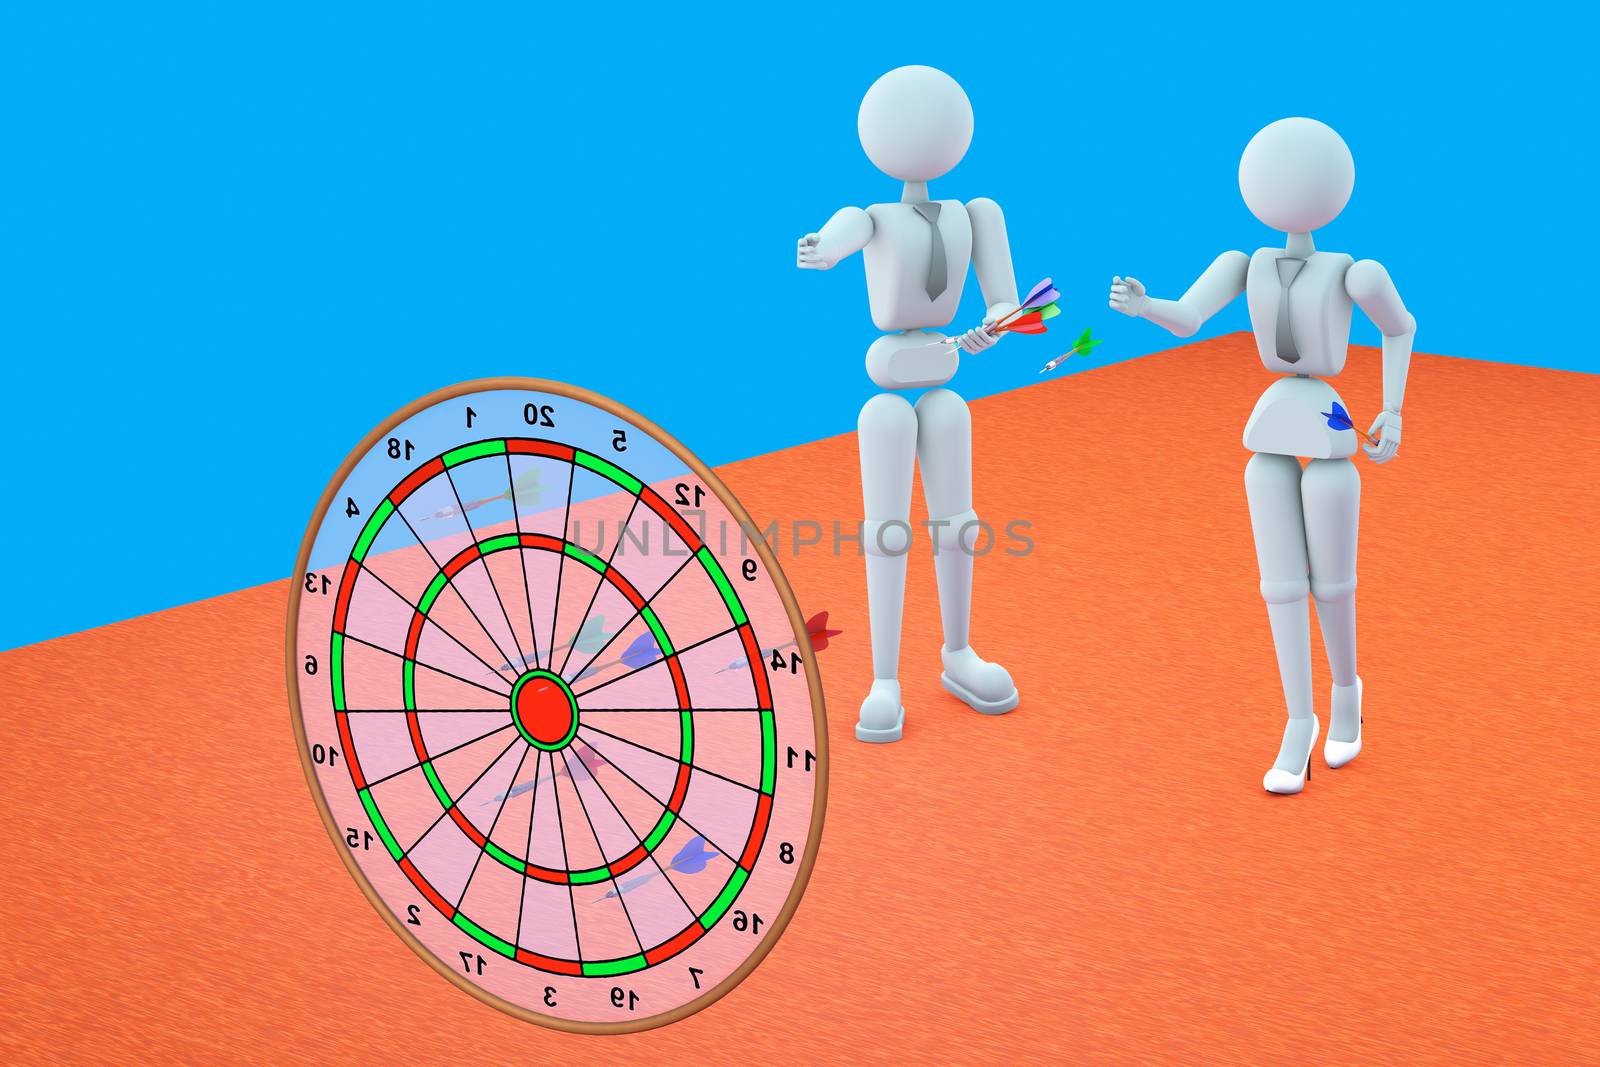 3D illustration. Puppet person, people, white human. Employees, break playing darts, throw a dart at a target. Blue background, brown floor. Copy space